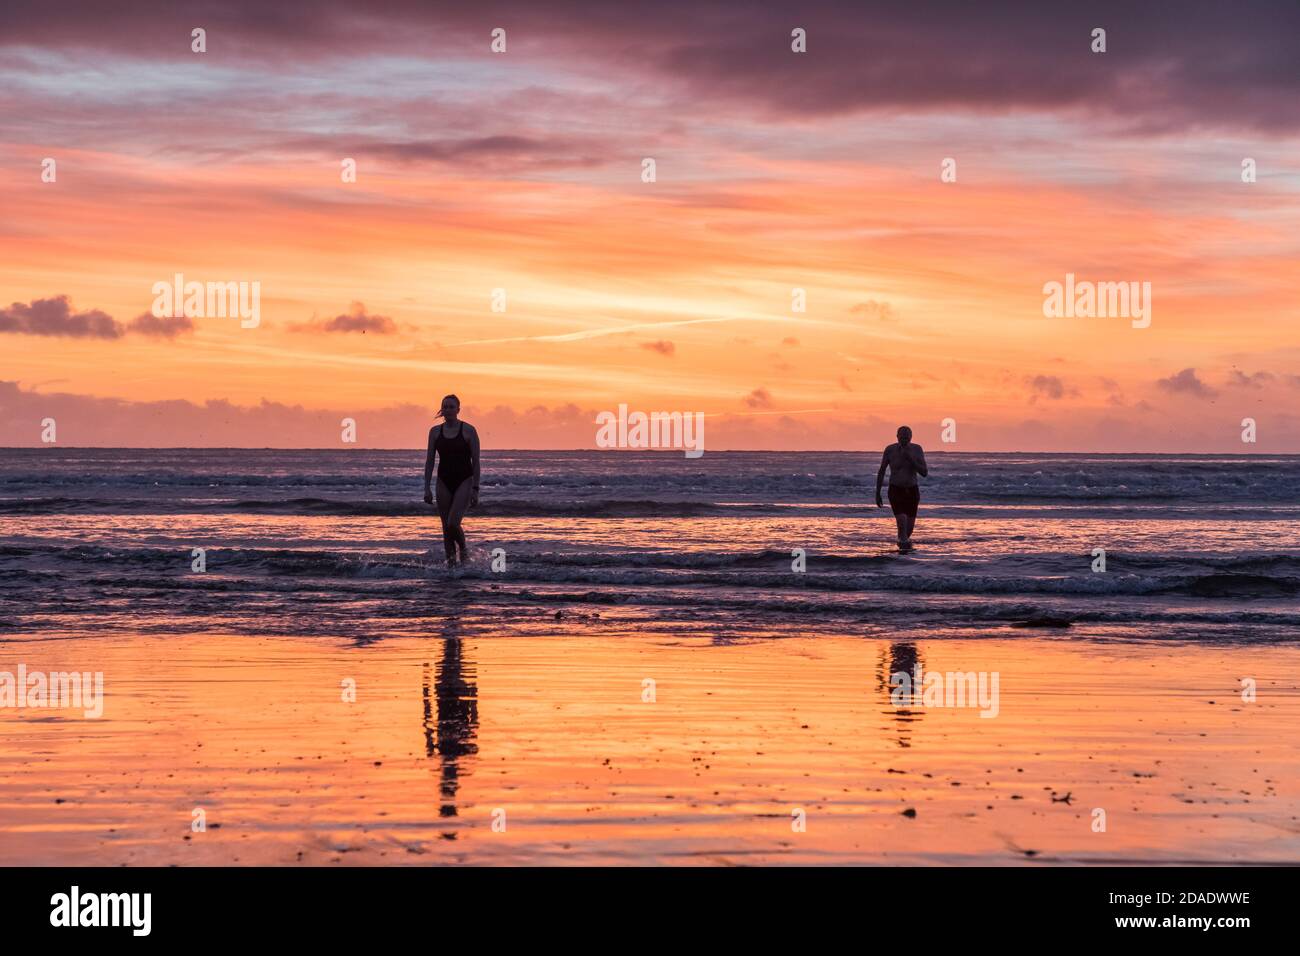 Fountainstown, Cork, Ireland. 12th November, 2020. Danu Ní Thuama and Séamus Ó Thuama emerge from the sea after their  early morning swim under a glorious dawn sky at Fountainstown, Co. Cork, Ireland. - Credit; David Creedon / Alamy Live News Stock Photo